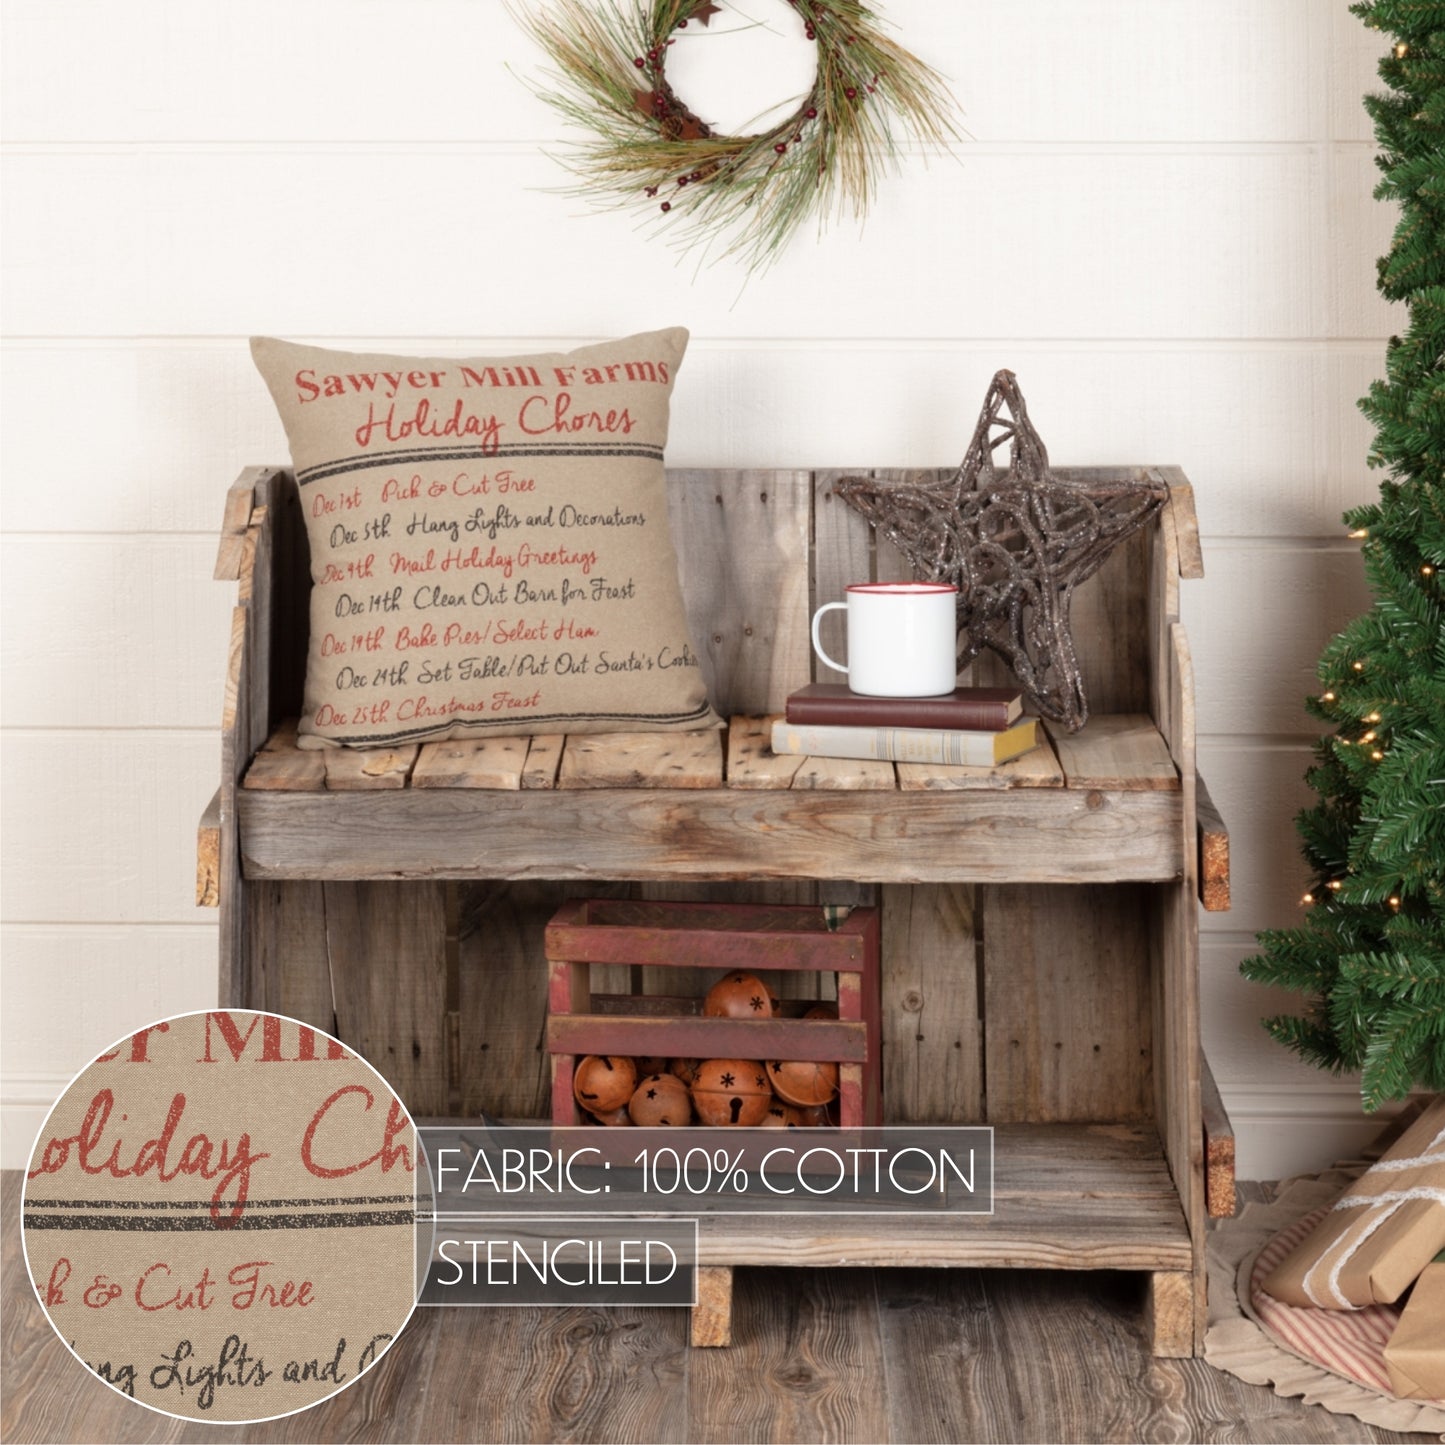 57362-Sawyer-Mill-Holiday-Chores-Pillow-18x18-image